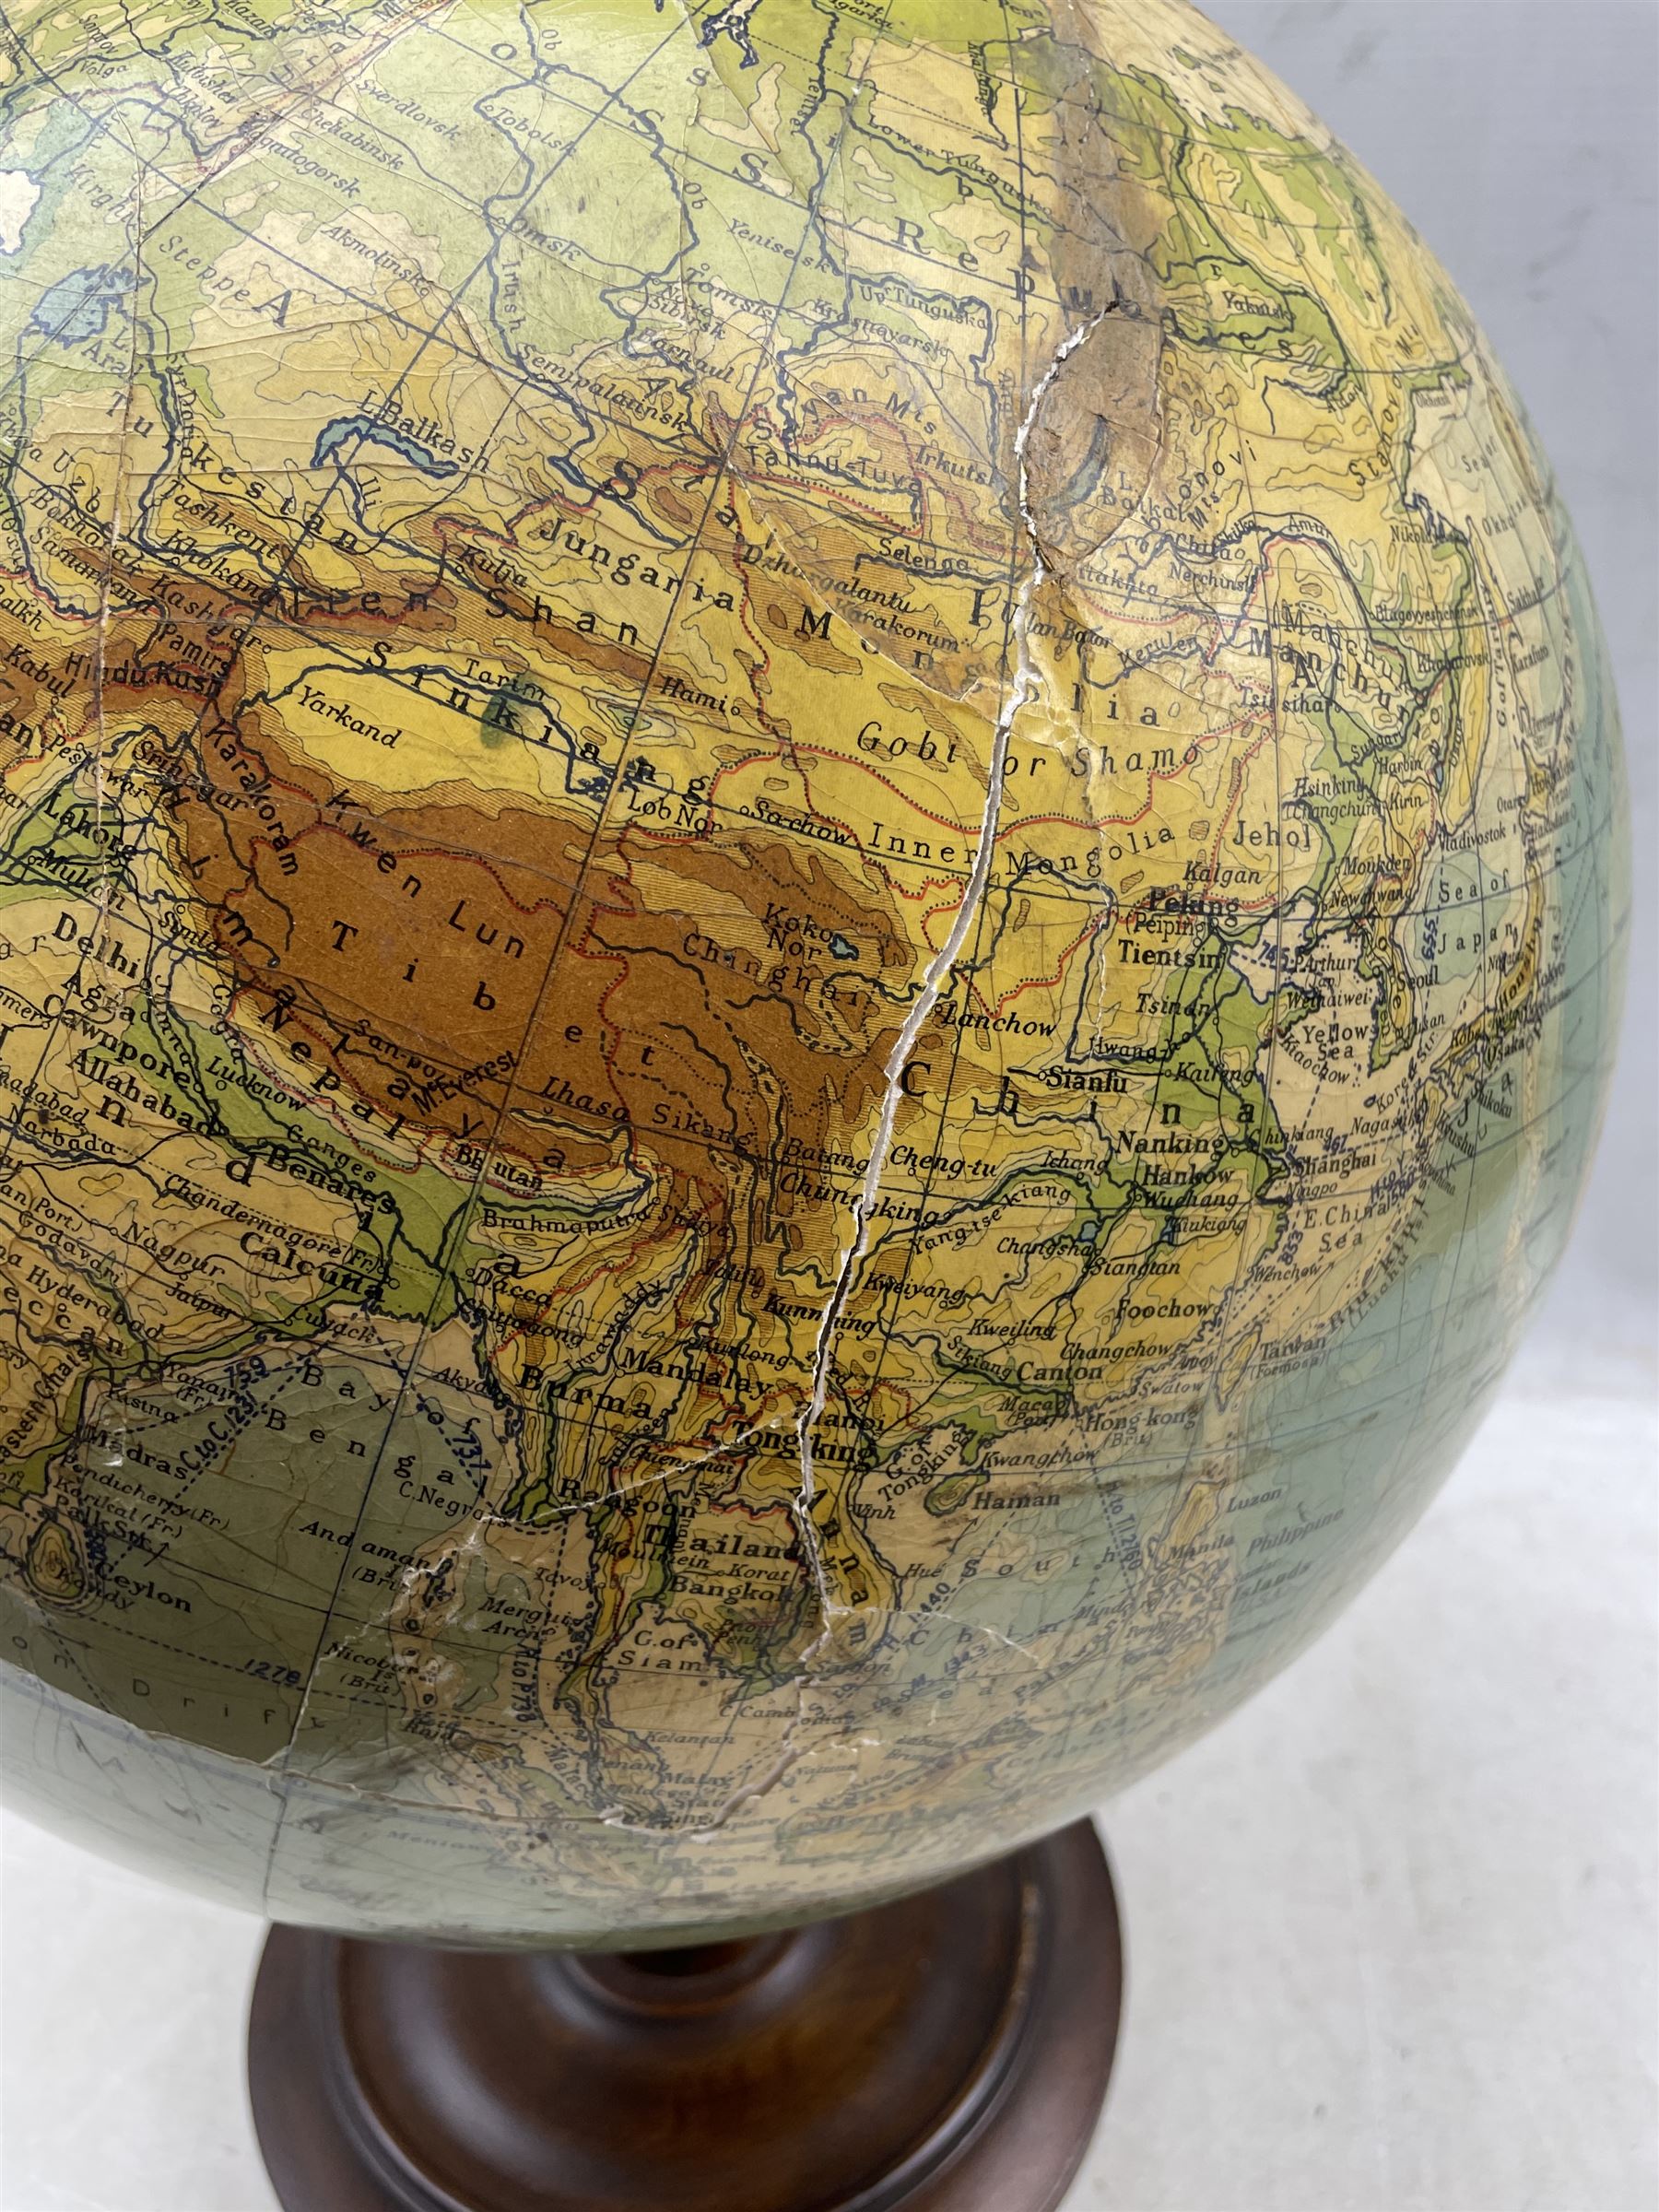 Phillips 14 Inch Terrestrial Globe by George Philip & Son Ltd for the London Geographical Institute - Image 3 of 4